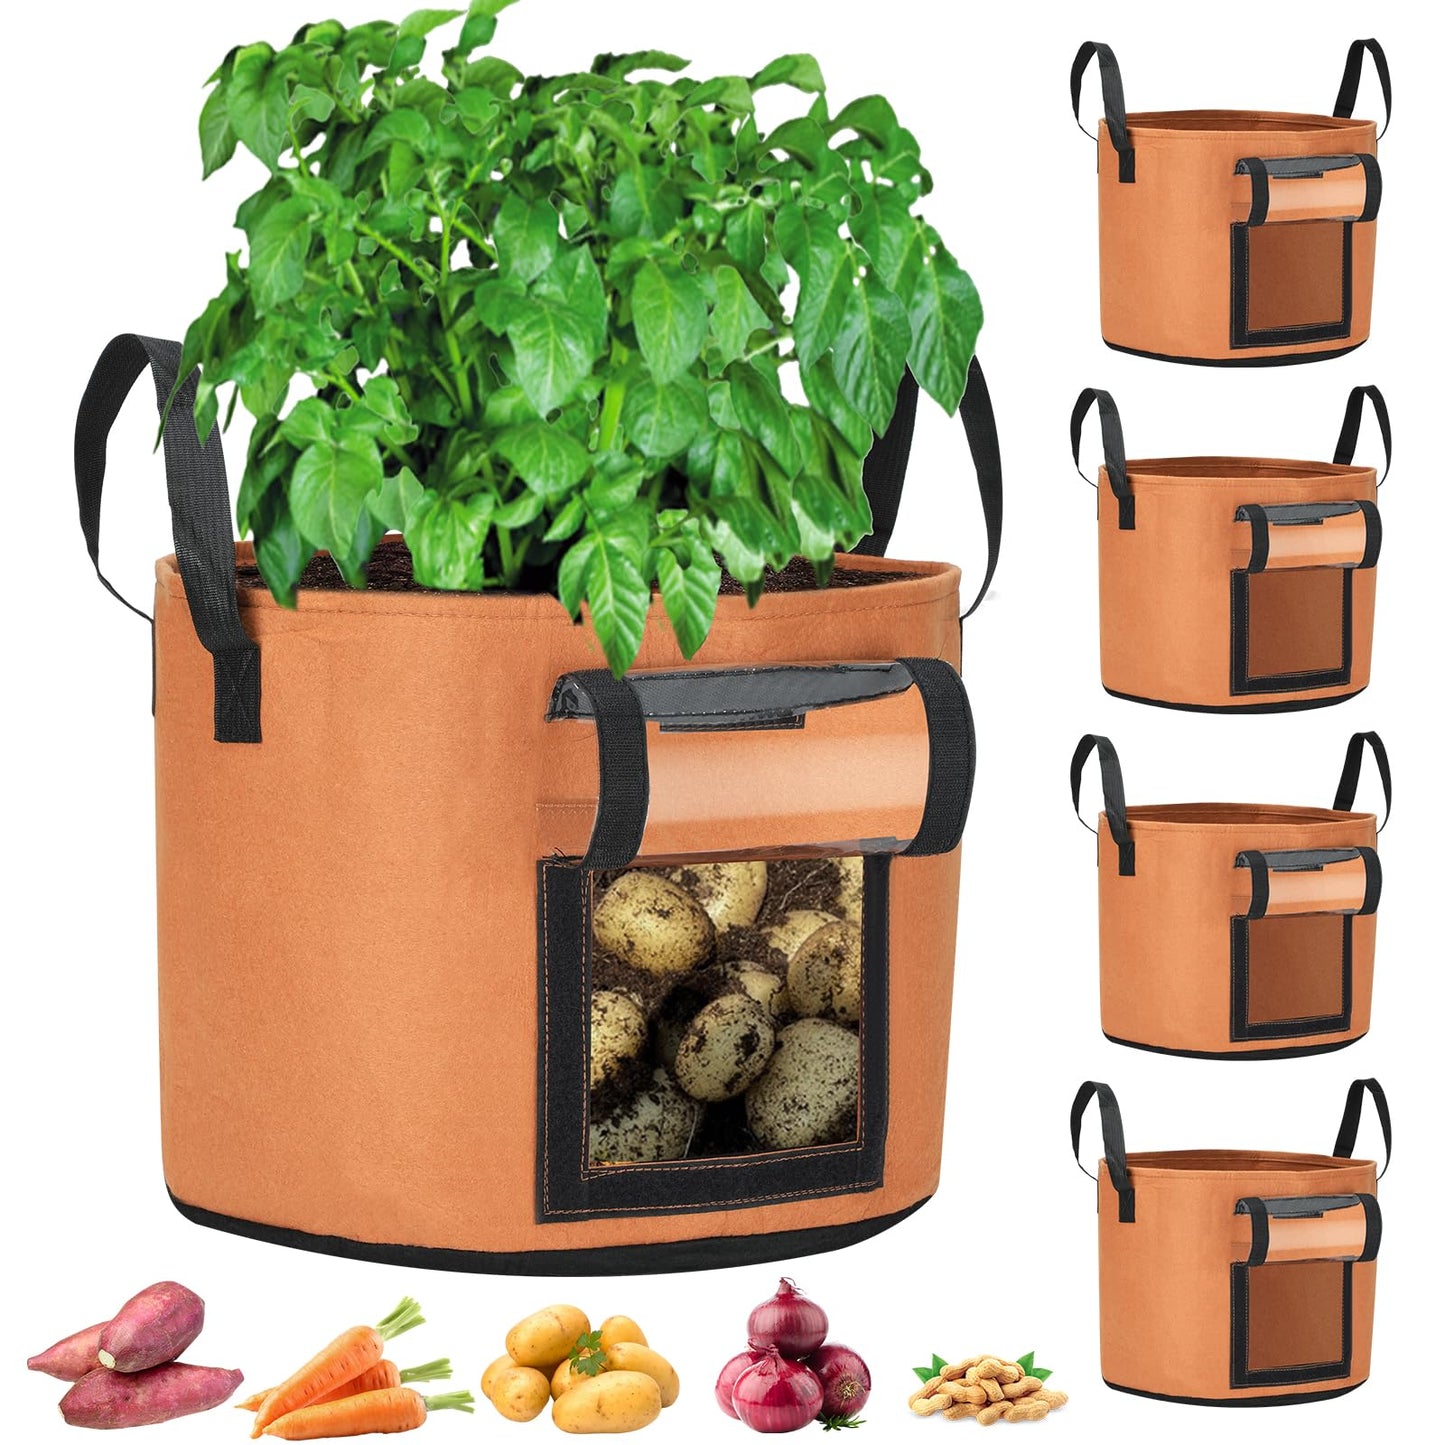 5-Pack 10 Gallon Potato Grow Bags, Heavy Duty Fabric Pots Thickened Nonwoven Plant Fabric Pots with Handles for Low Stress Plant Training Fruits